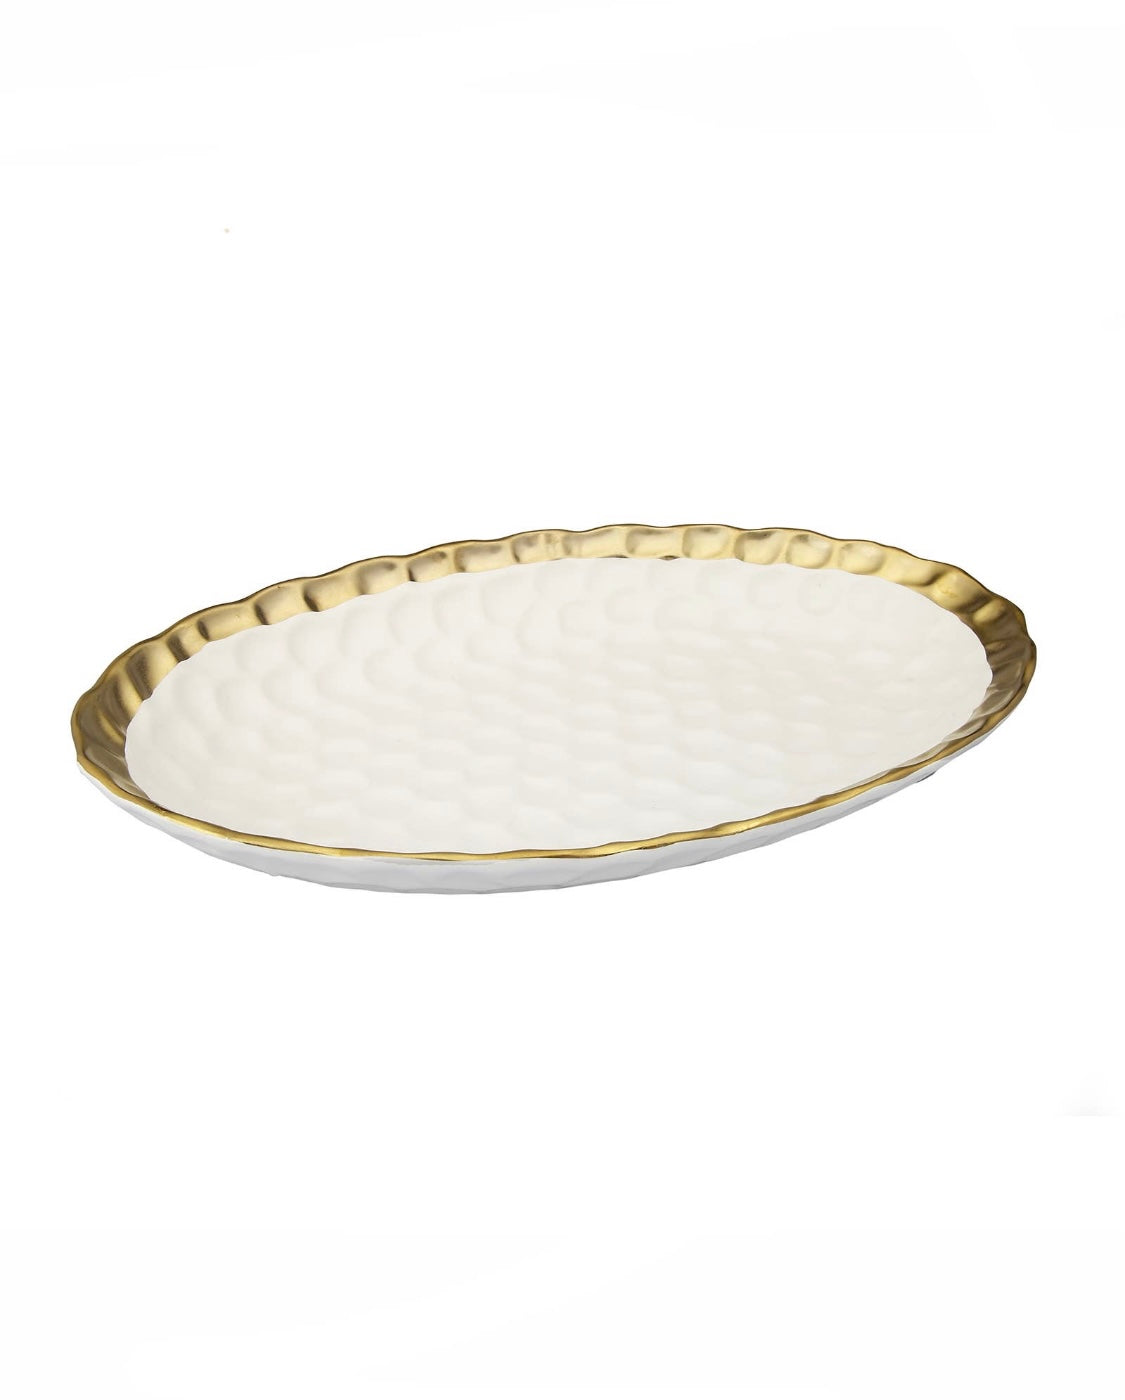 White Ceramic plate with Gold trim